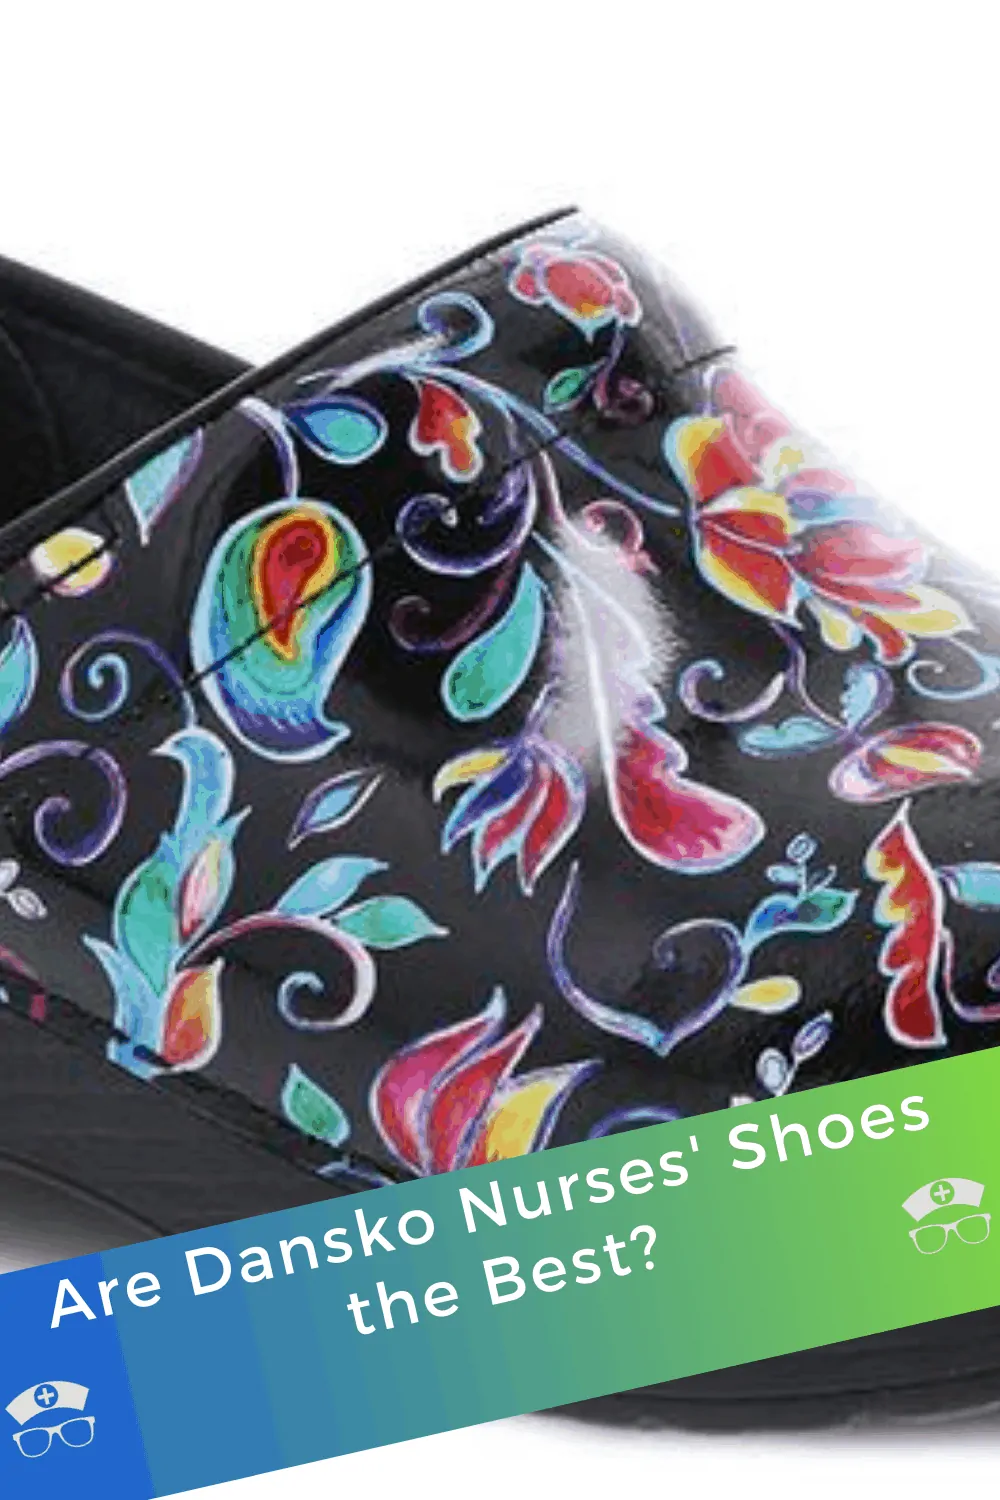 Are Dansko Nurses’ Shoes the Best? Being a nurse can be very demanding. But to able to get around the entire day, you need the most comfortable shoes that provide good support.  Dansko is a very popular brand that many consider the best shoes for nurses. #thenerdynurse #nurse #nurses #nurseshoes #dansko #shoesfornurses #nursingshoes 